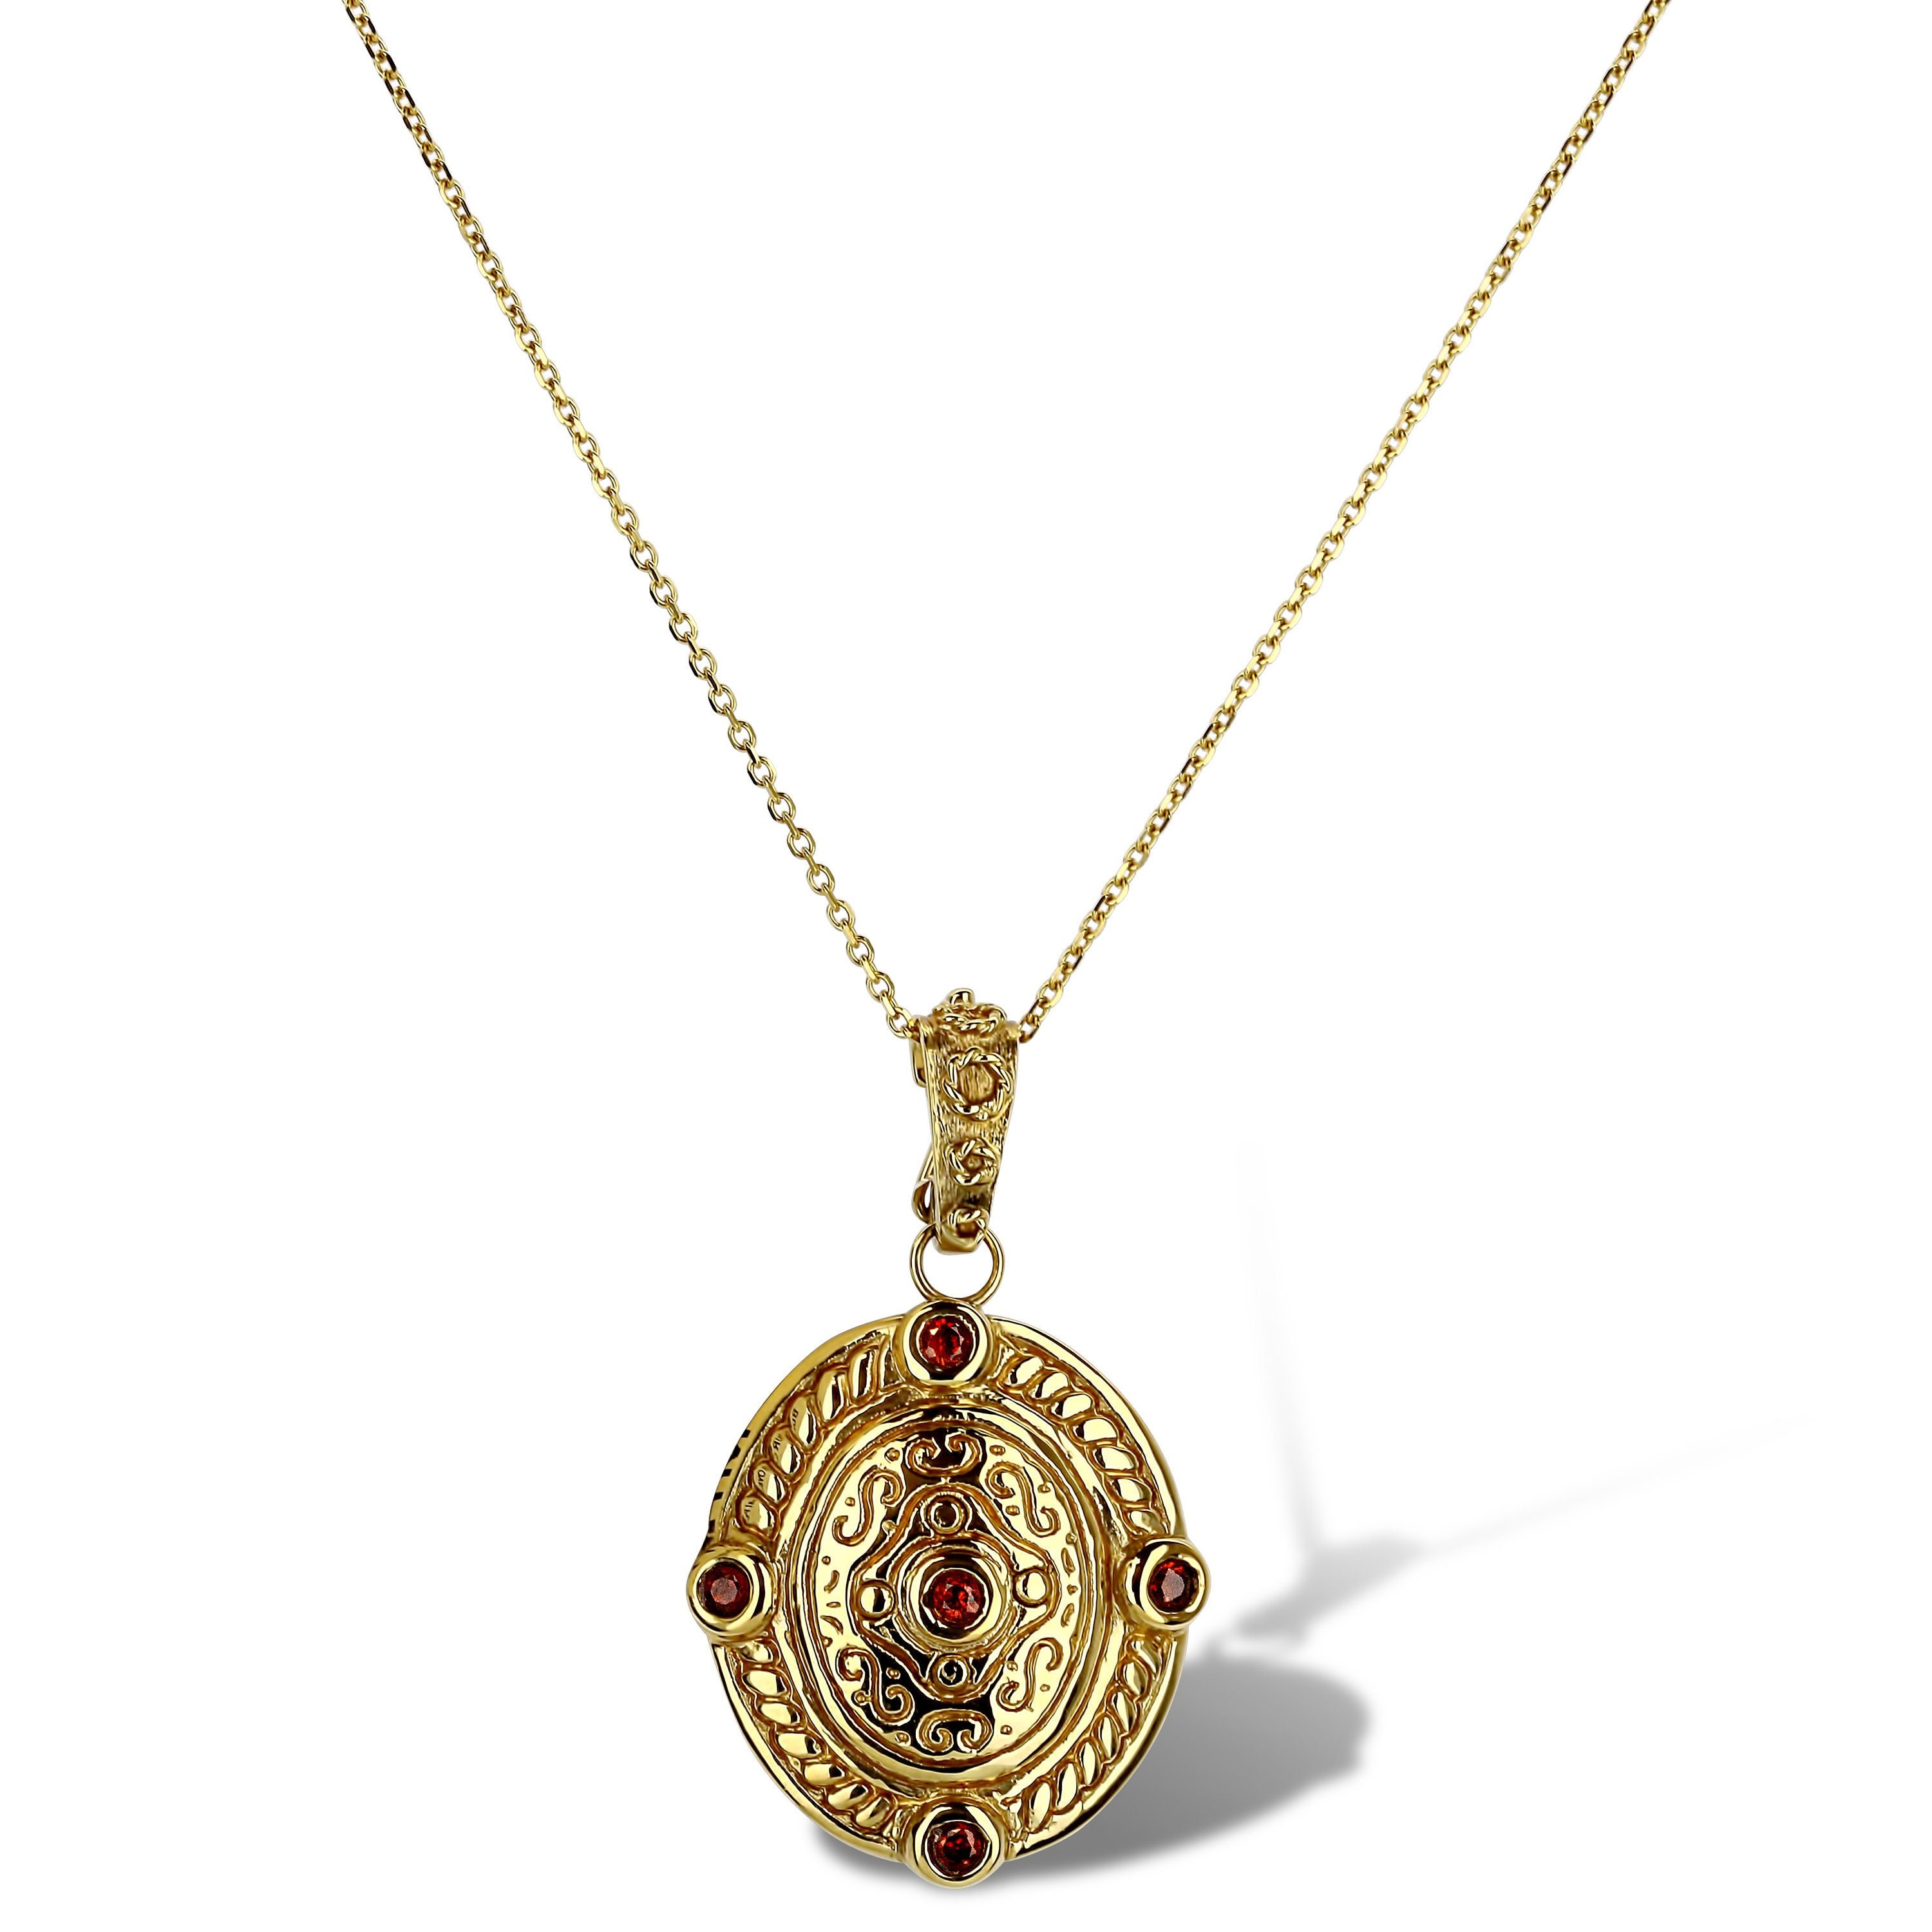 Yellow Gold Oval Pendant With Garnets - Etsy